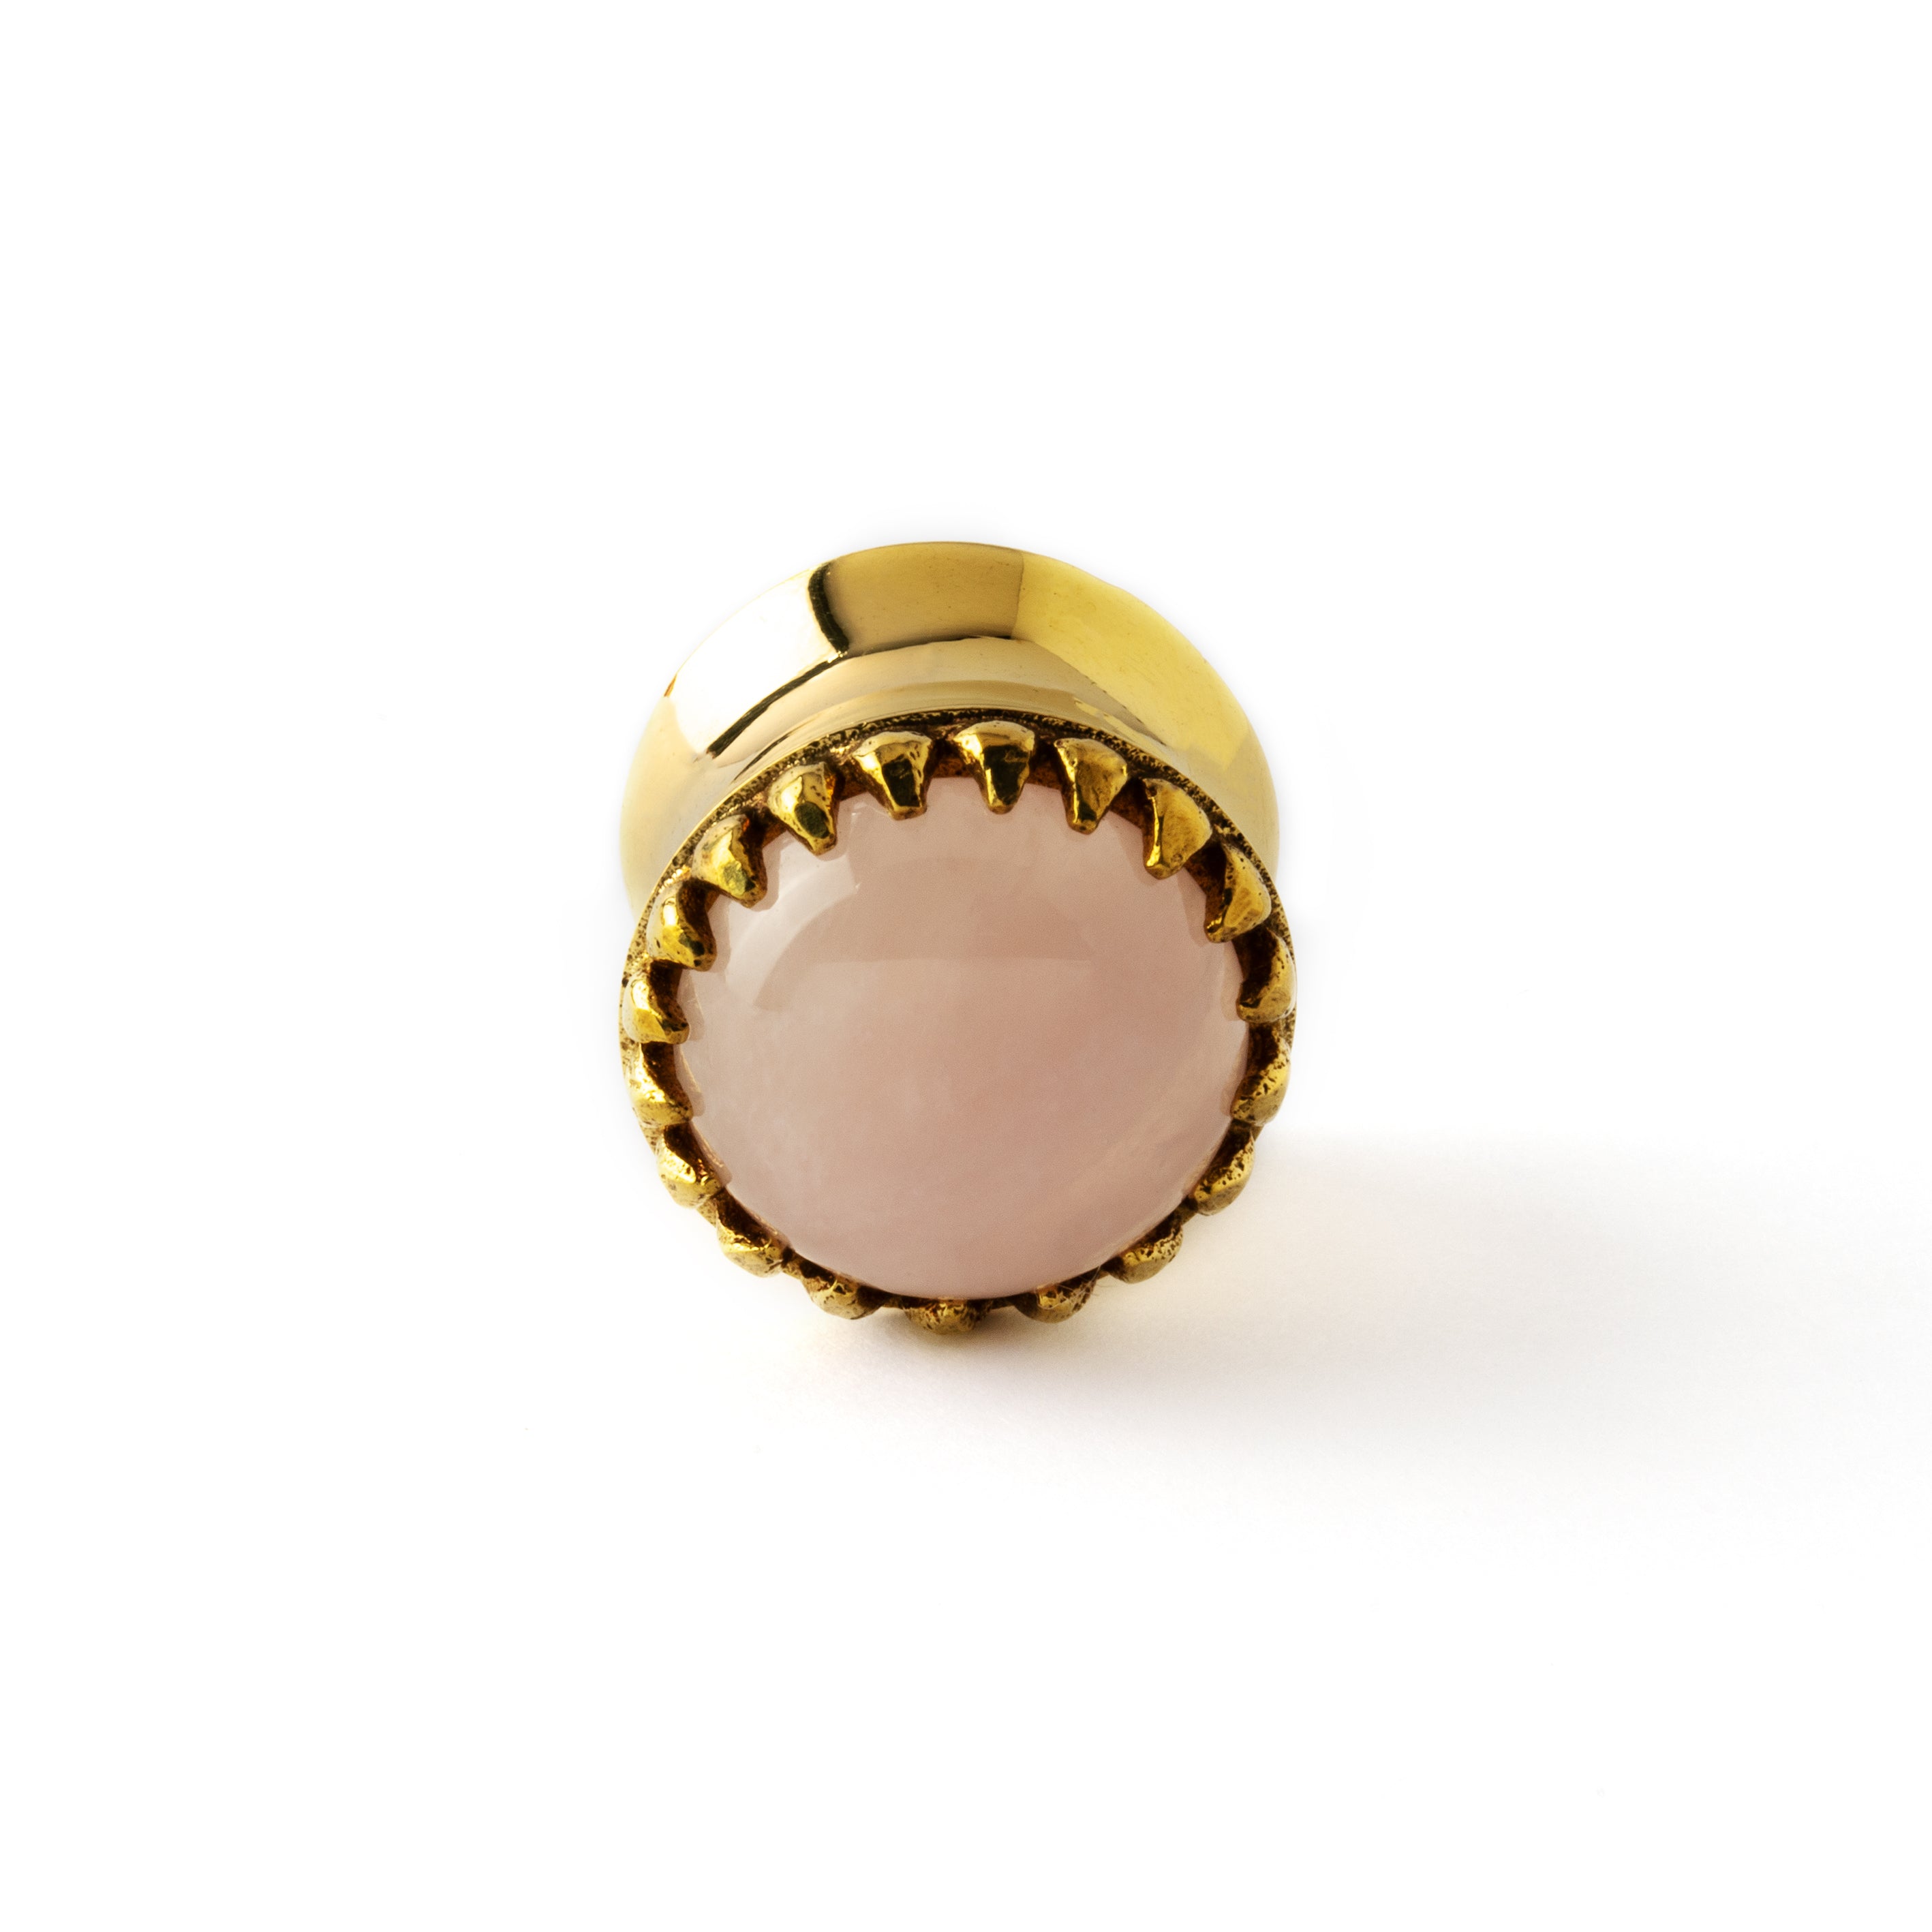 golden ear plug crown shaped with centred rose quartz front view